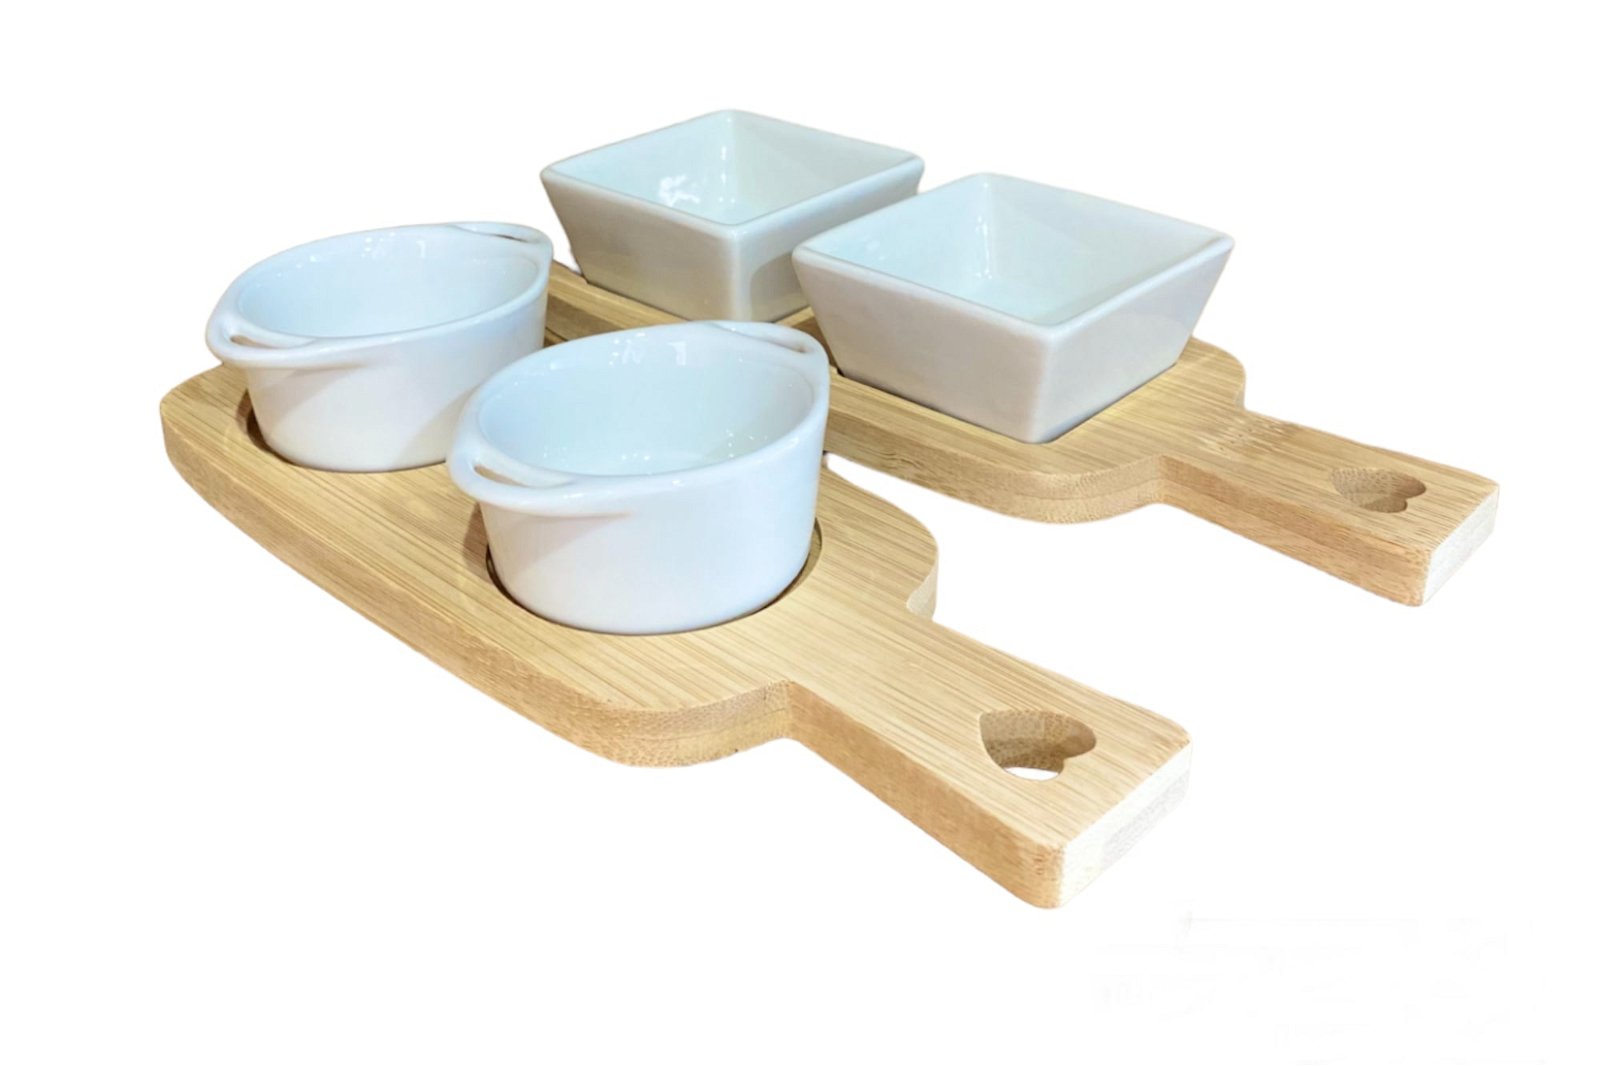 Dip Dishes On Bamboo Tray